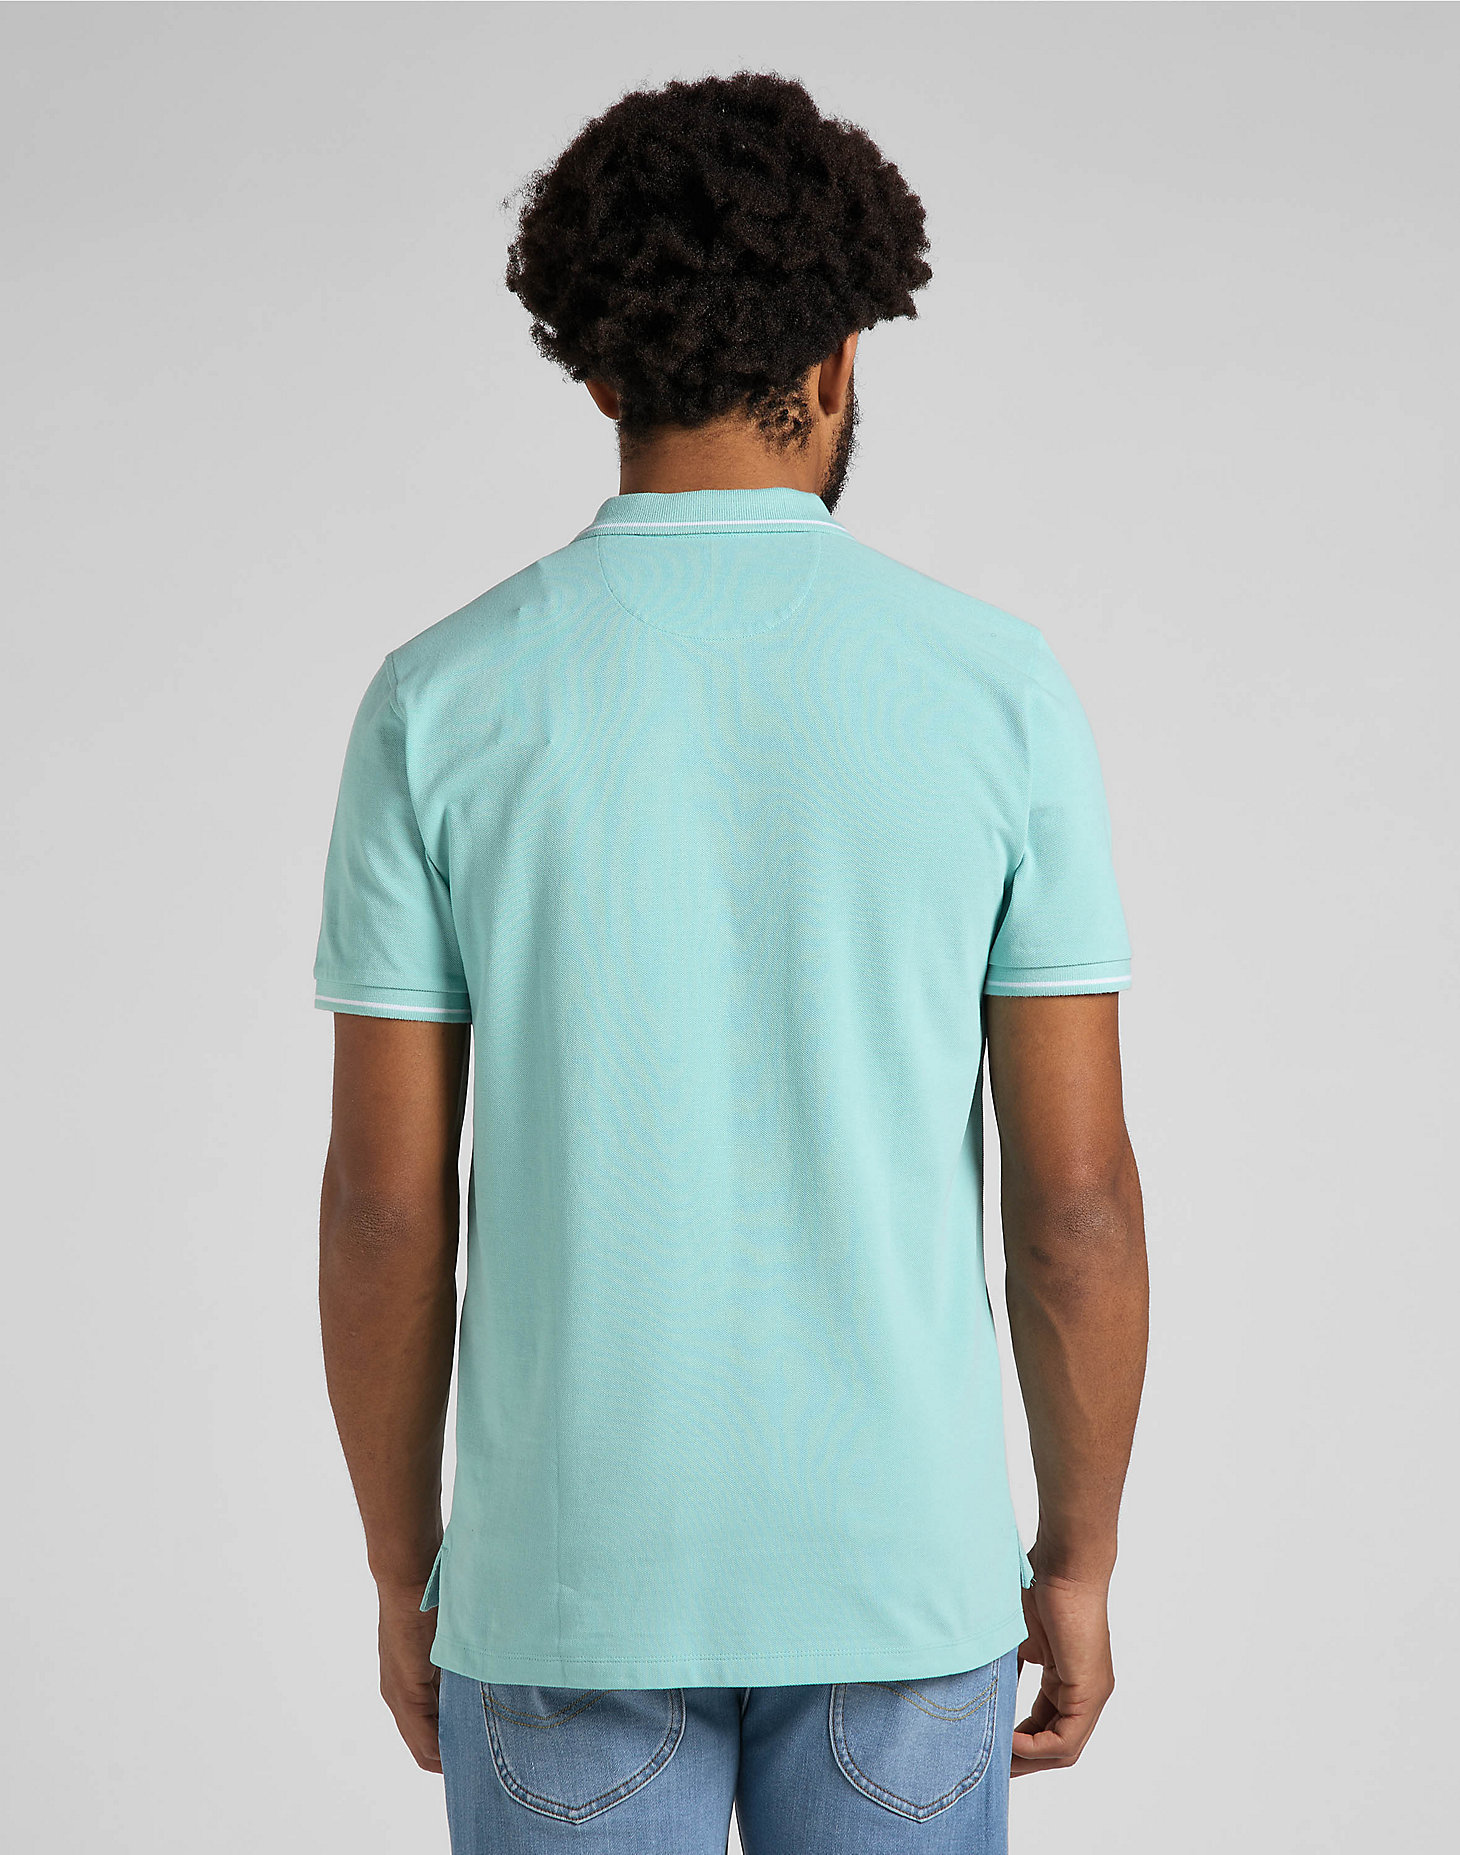 Pique Polo in Mint Blue alternative view 2